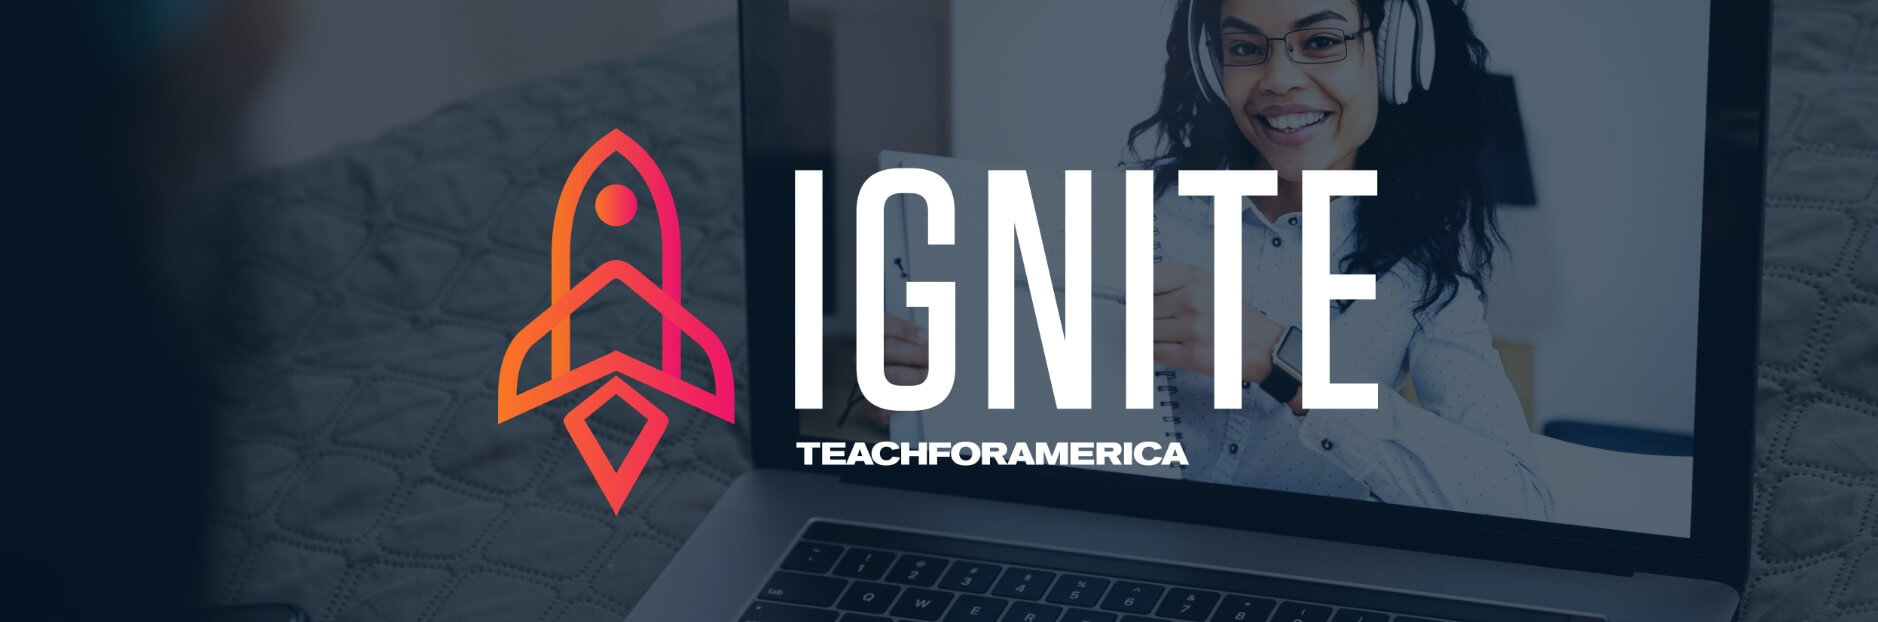 Featured image for “Paid Virtual Tutoring Opportunity with Teach For America Ignite Fellowship”